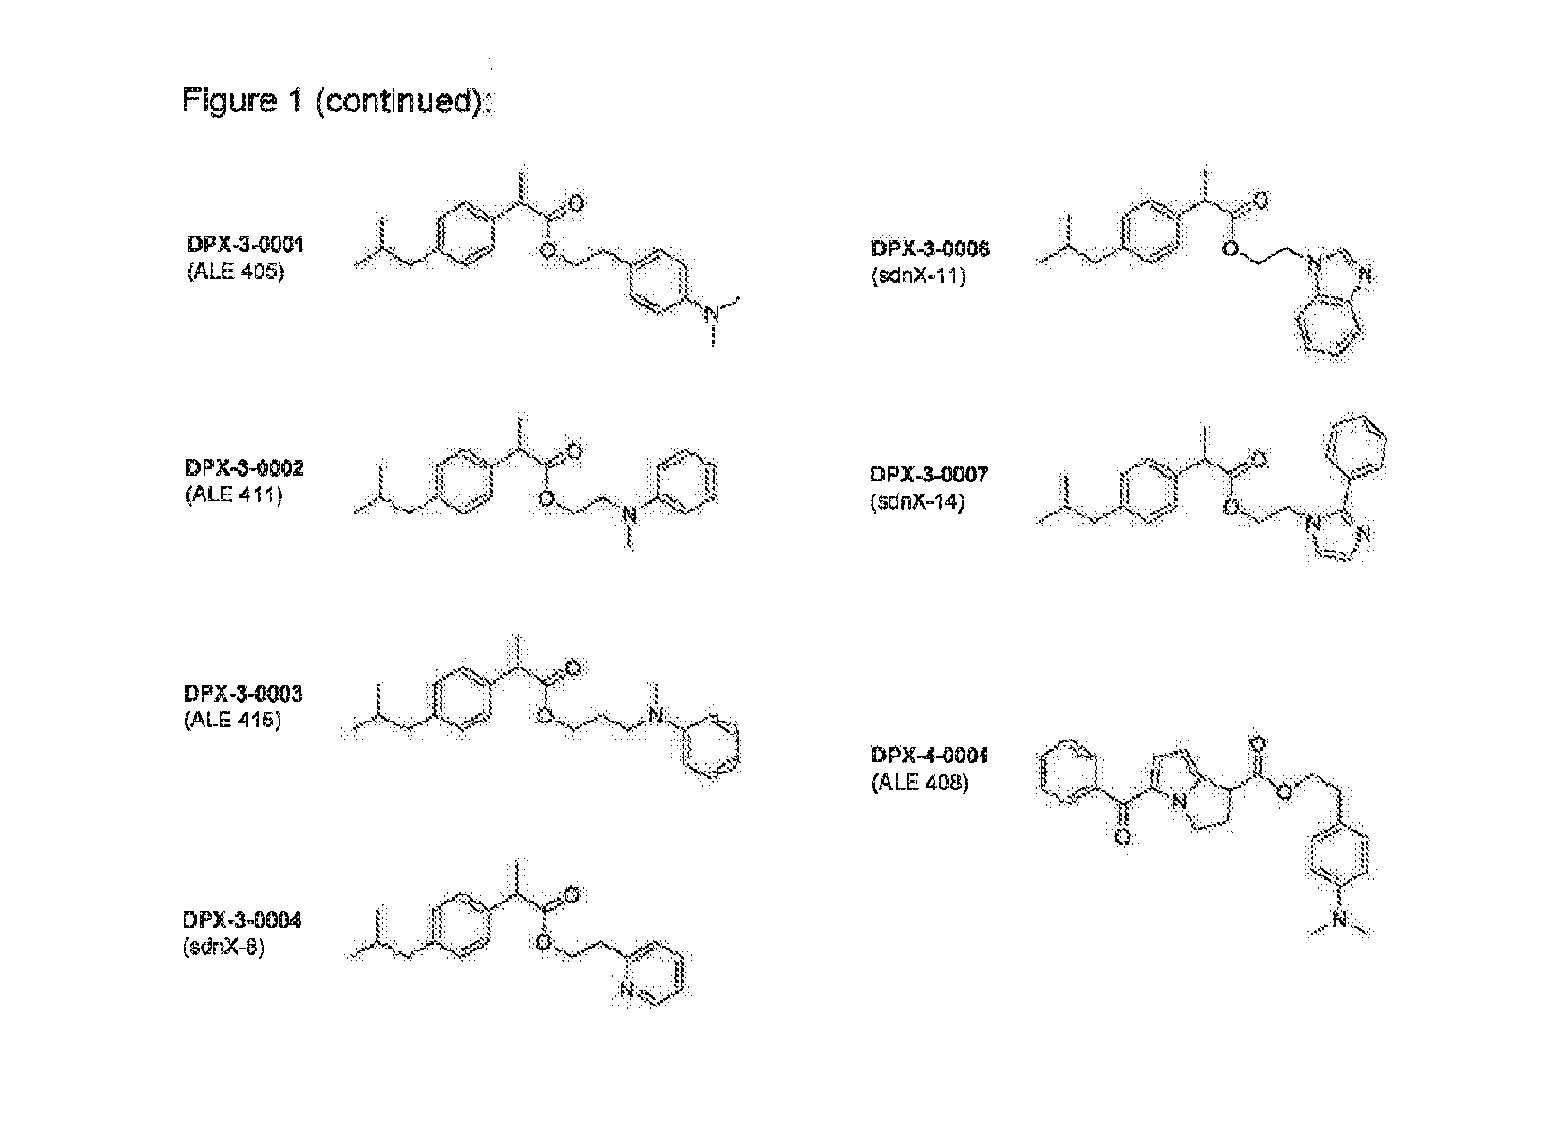 Prodrugs of non-steroid Anti-inflammatory agents (nsaids)